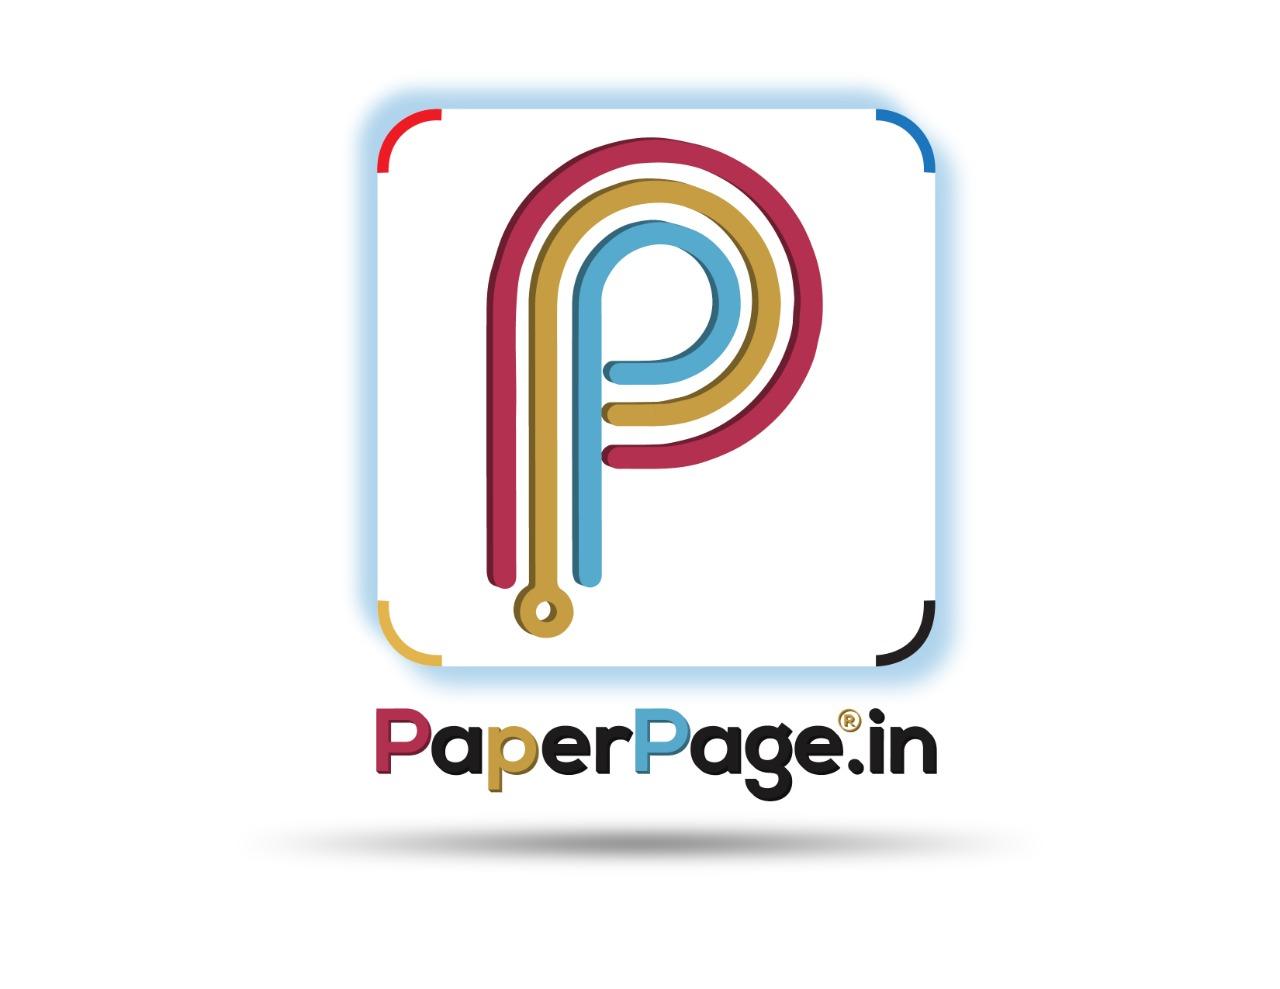 Welcome to paperpage - best social media